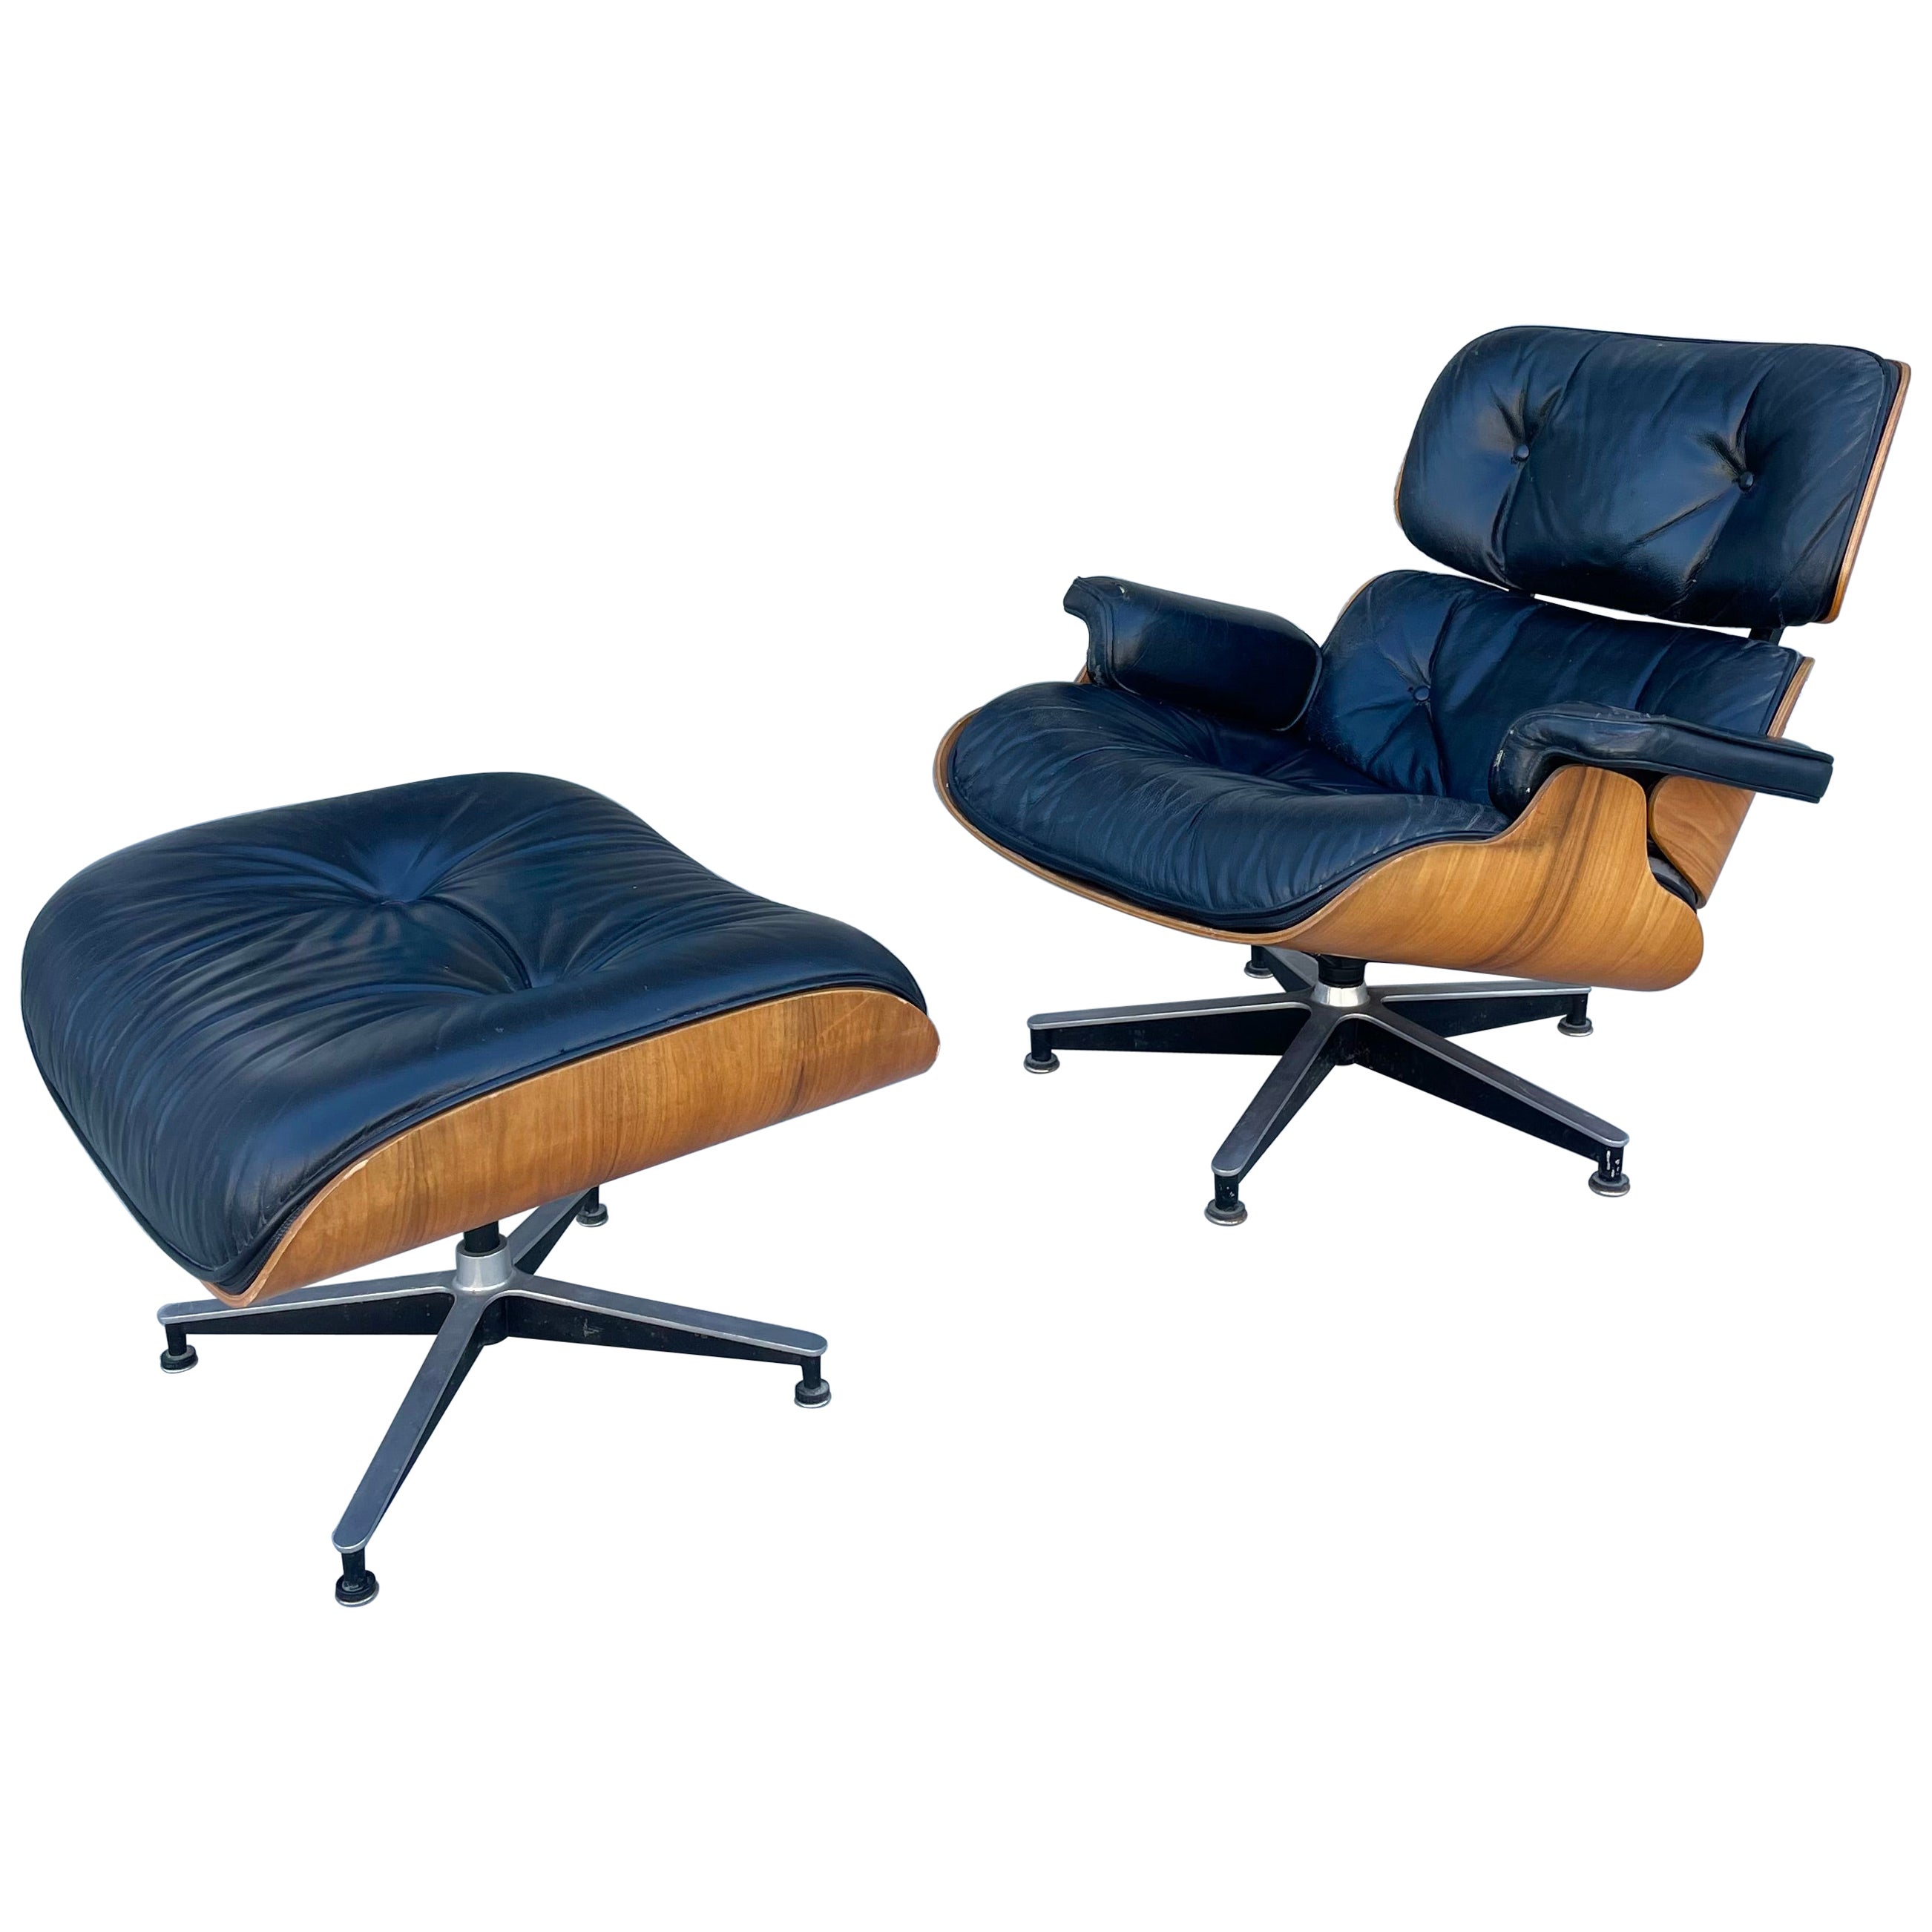 1970s Mid Century Recliner Chair and Ottoman Styled After Herman Miller For Sale